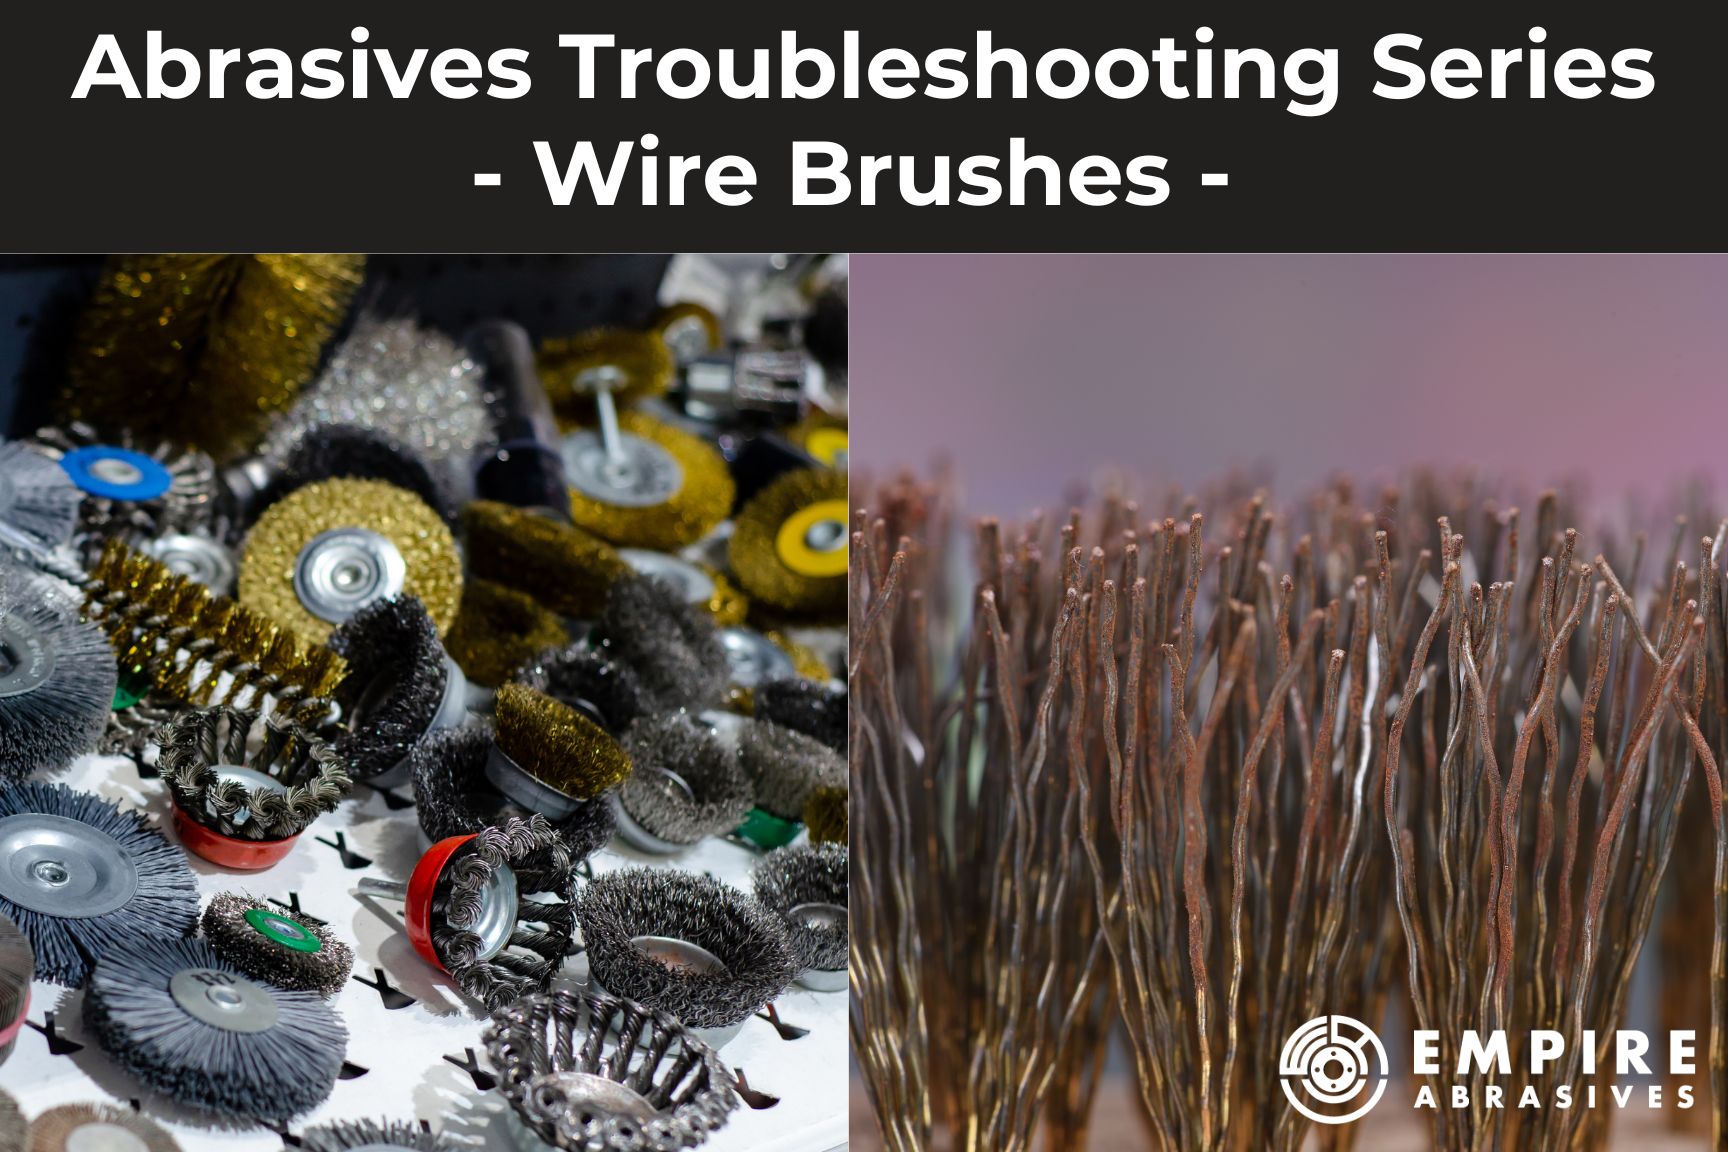 Troubleshooting Common Abrasive Tool Issues - Wire Brushes